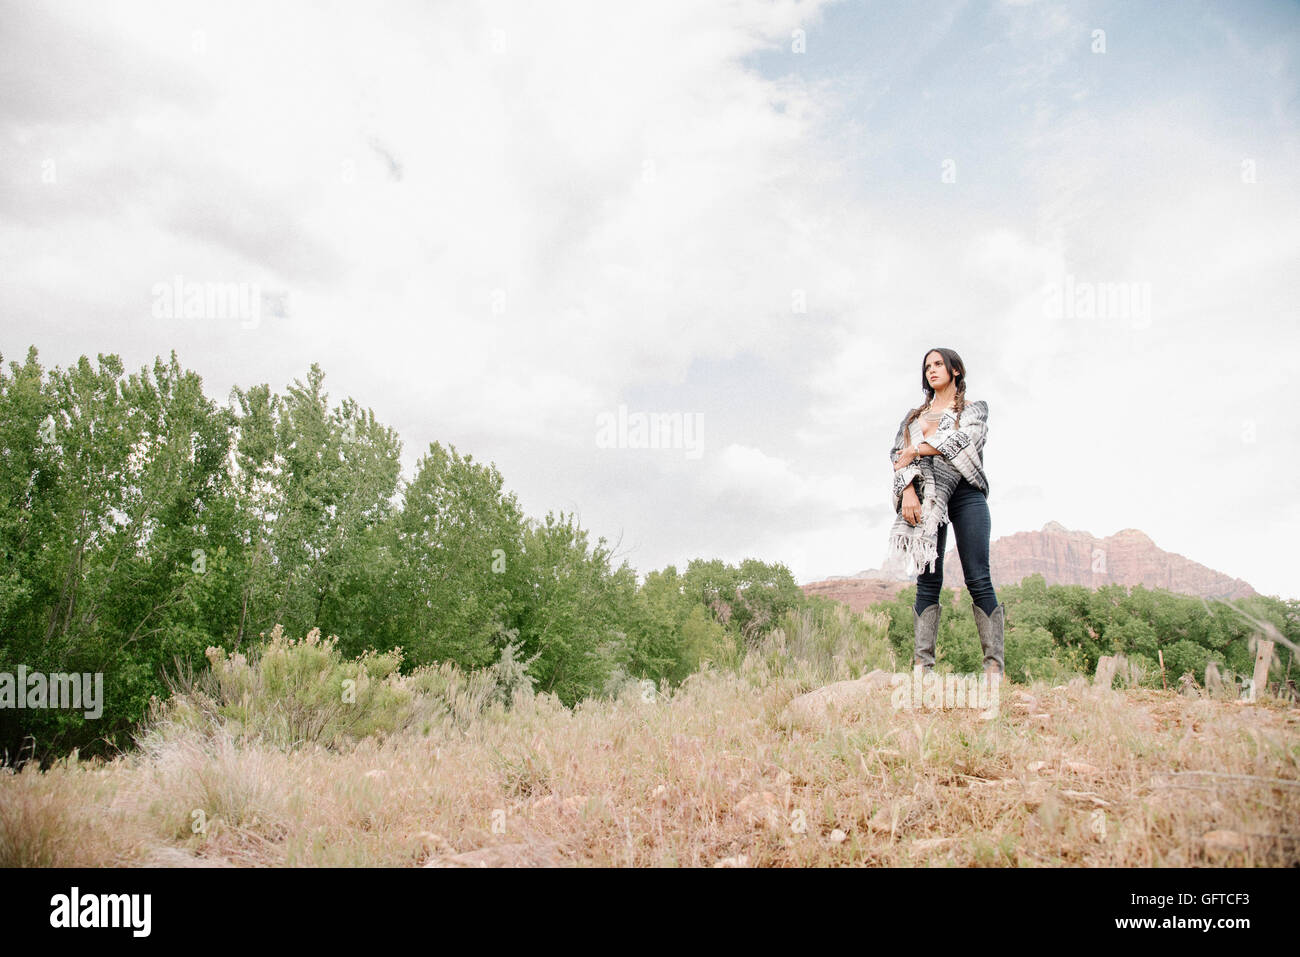 Young woman with long brown hair standing in a prairie under a cloudy sky Stock Photo